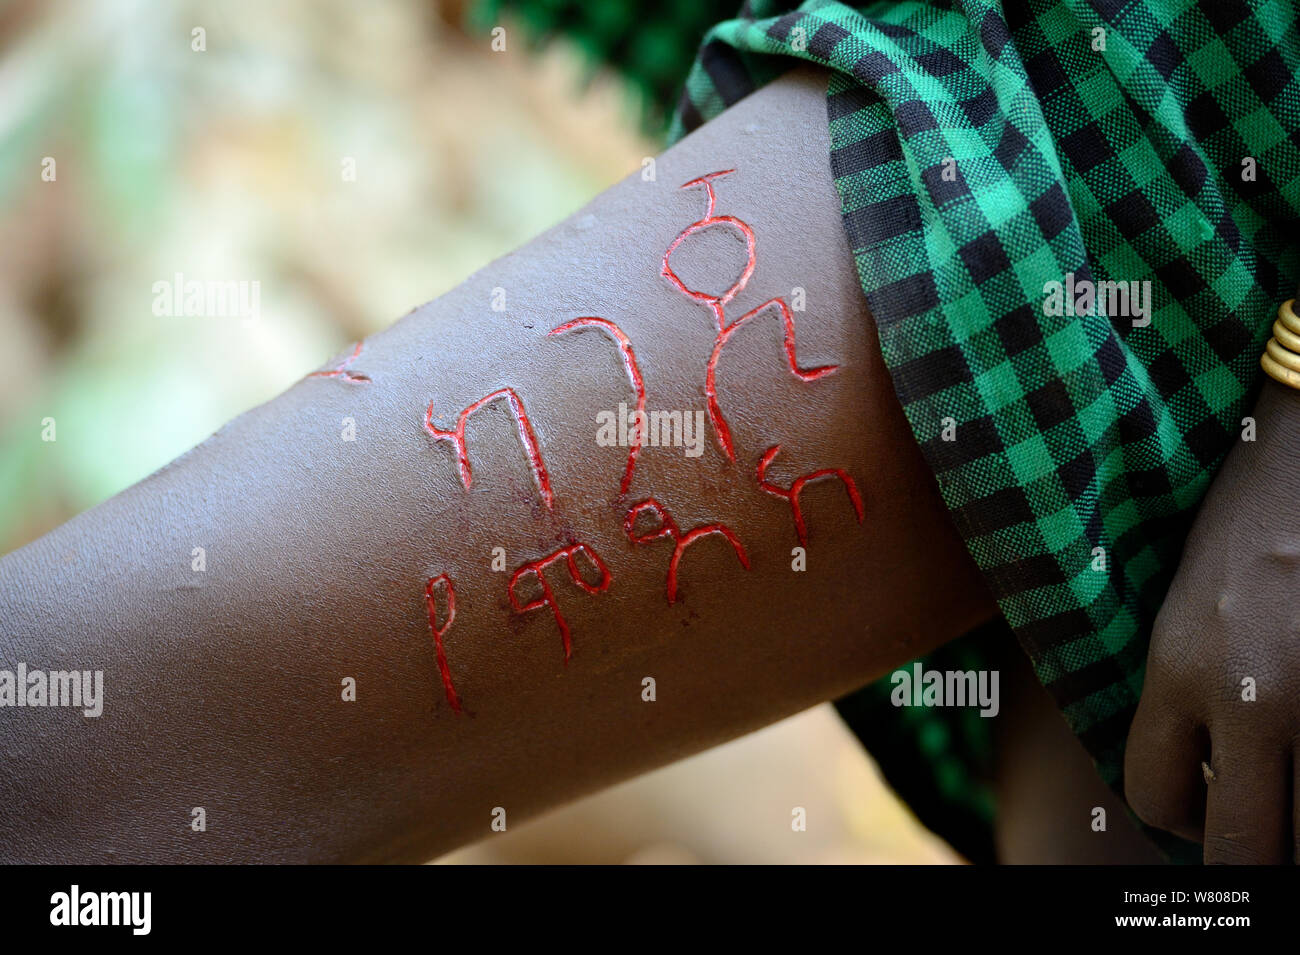 Young woman from the Bodi tribe displaying elaborate skin scarifications on her leg, her name in Amharic language, Omo Valley, Ethiopia, March 2015. Stock Photo